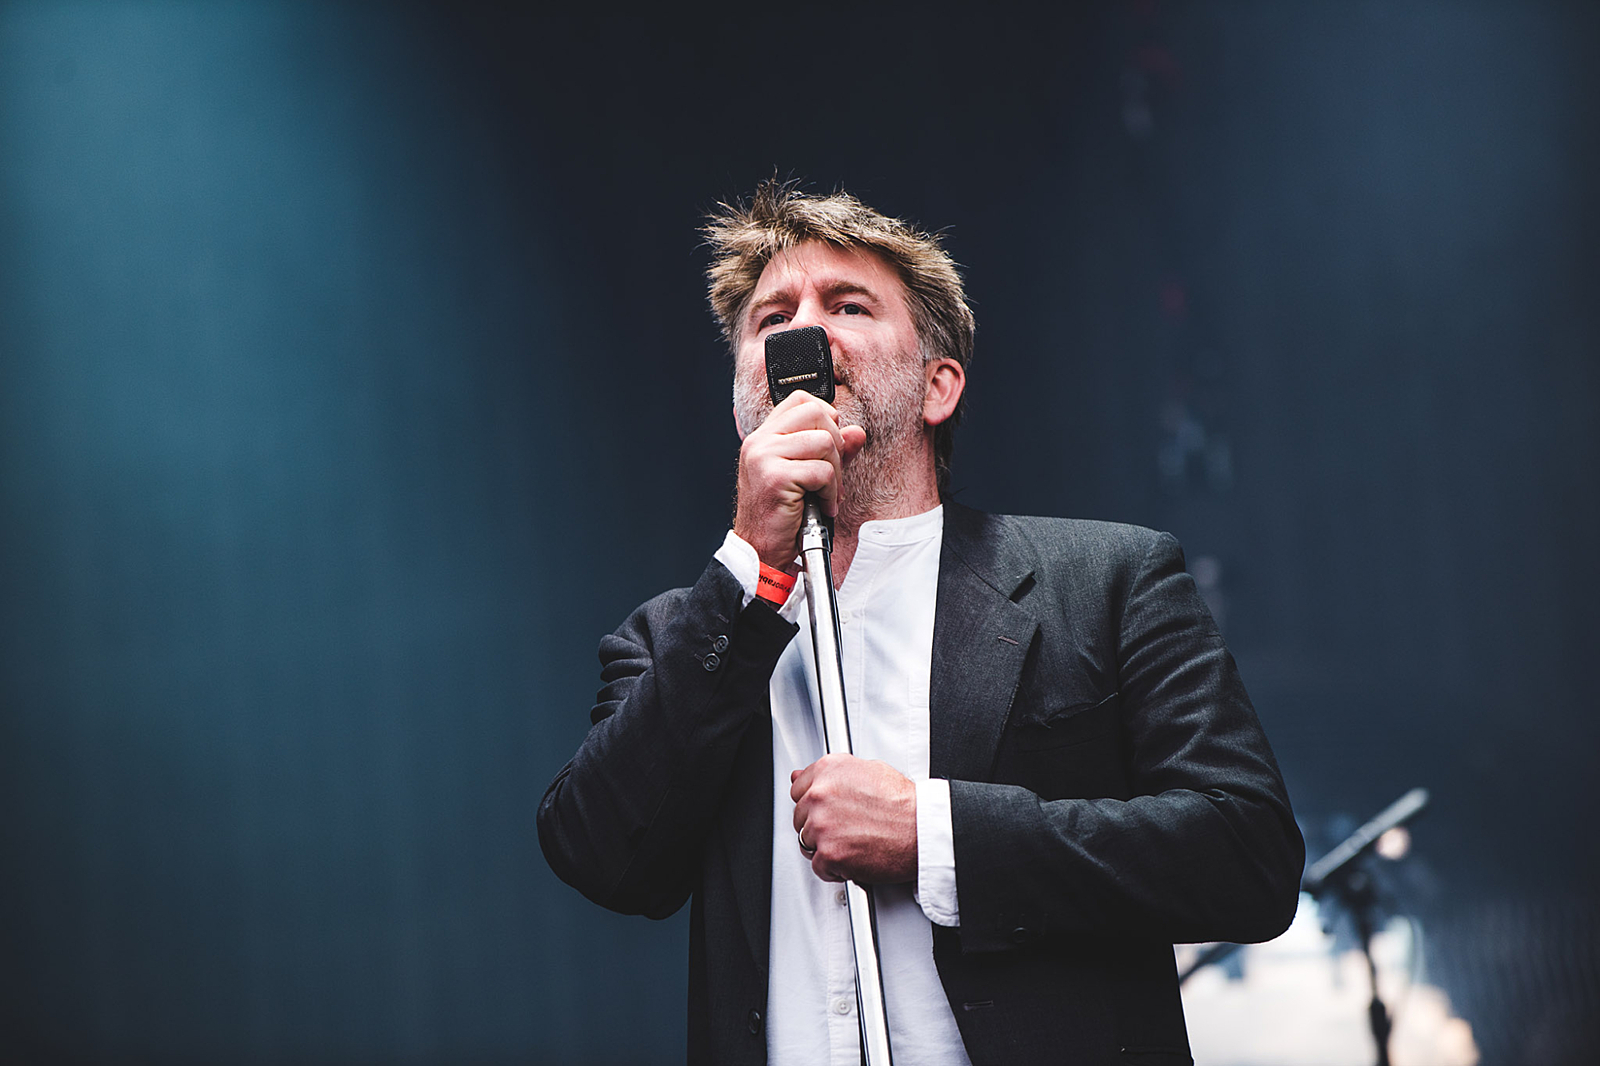 LCD Soundsystem, The Killers and Phoebe Bridgers to play Bilbao BBK Live 2022